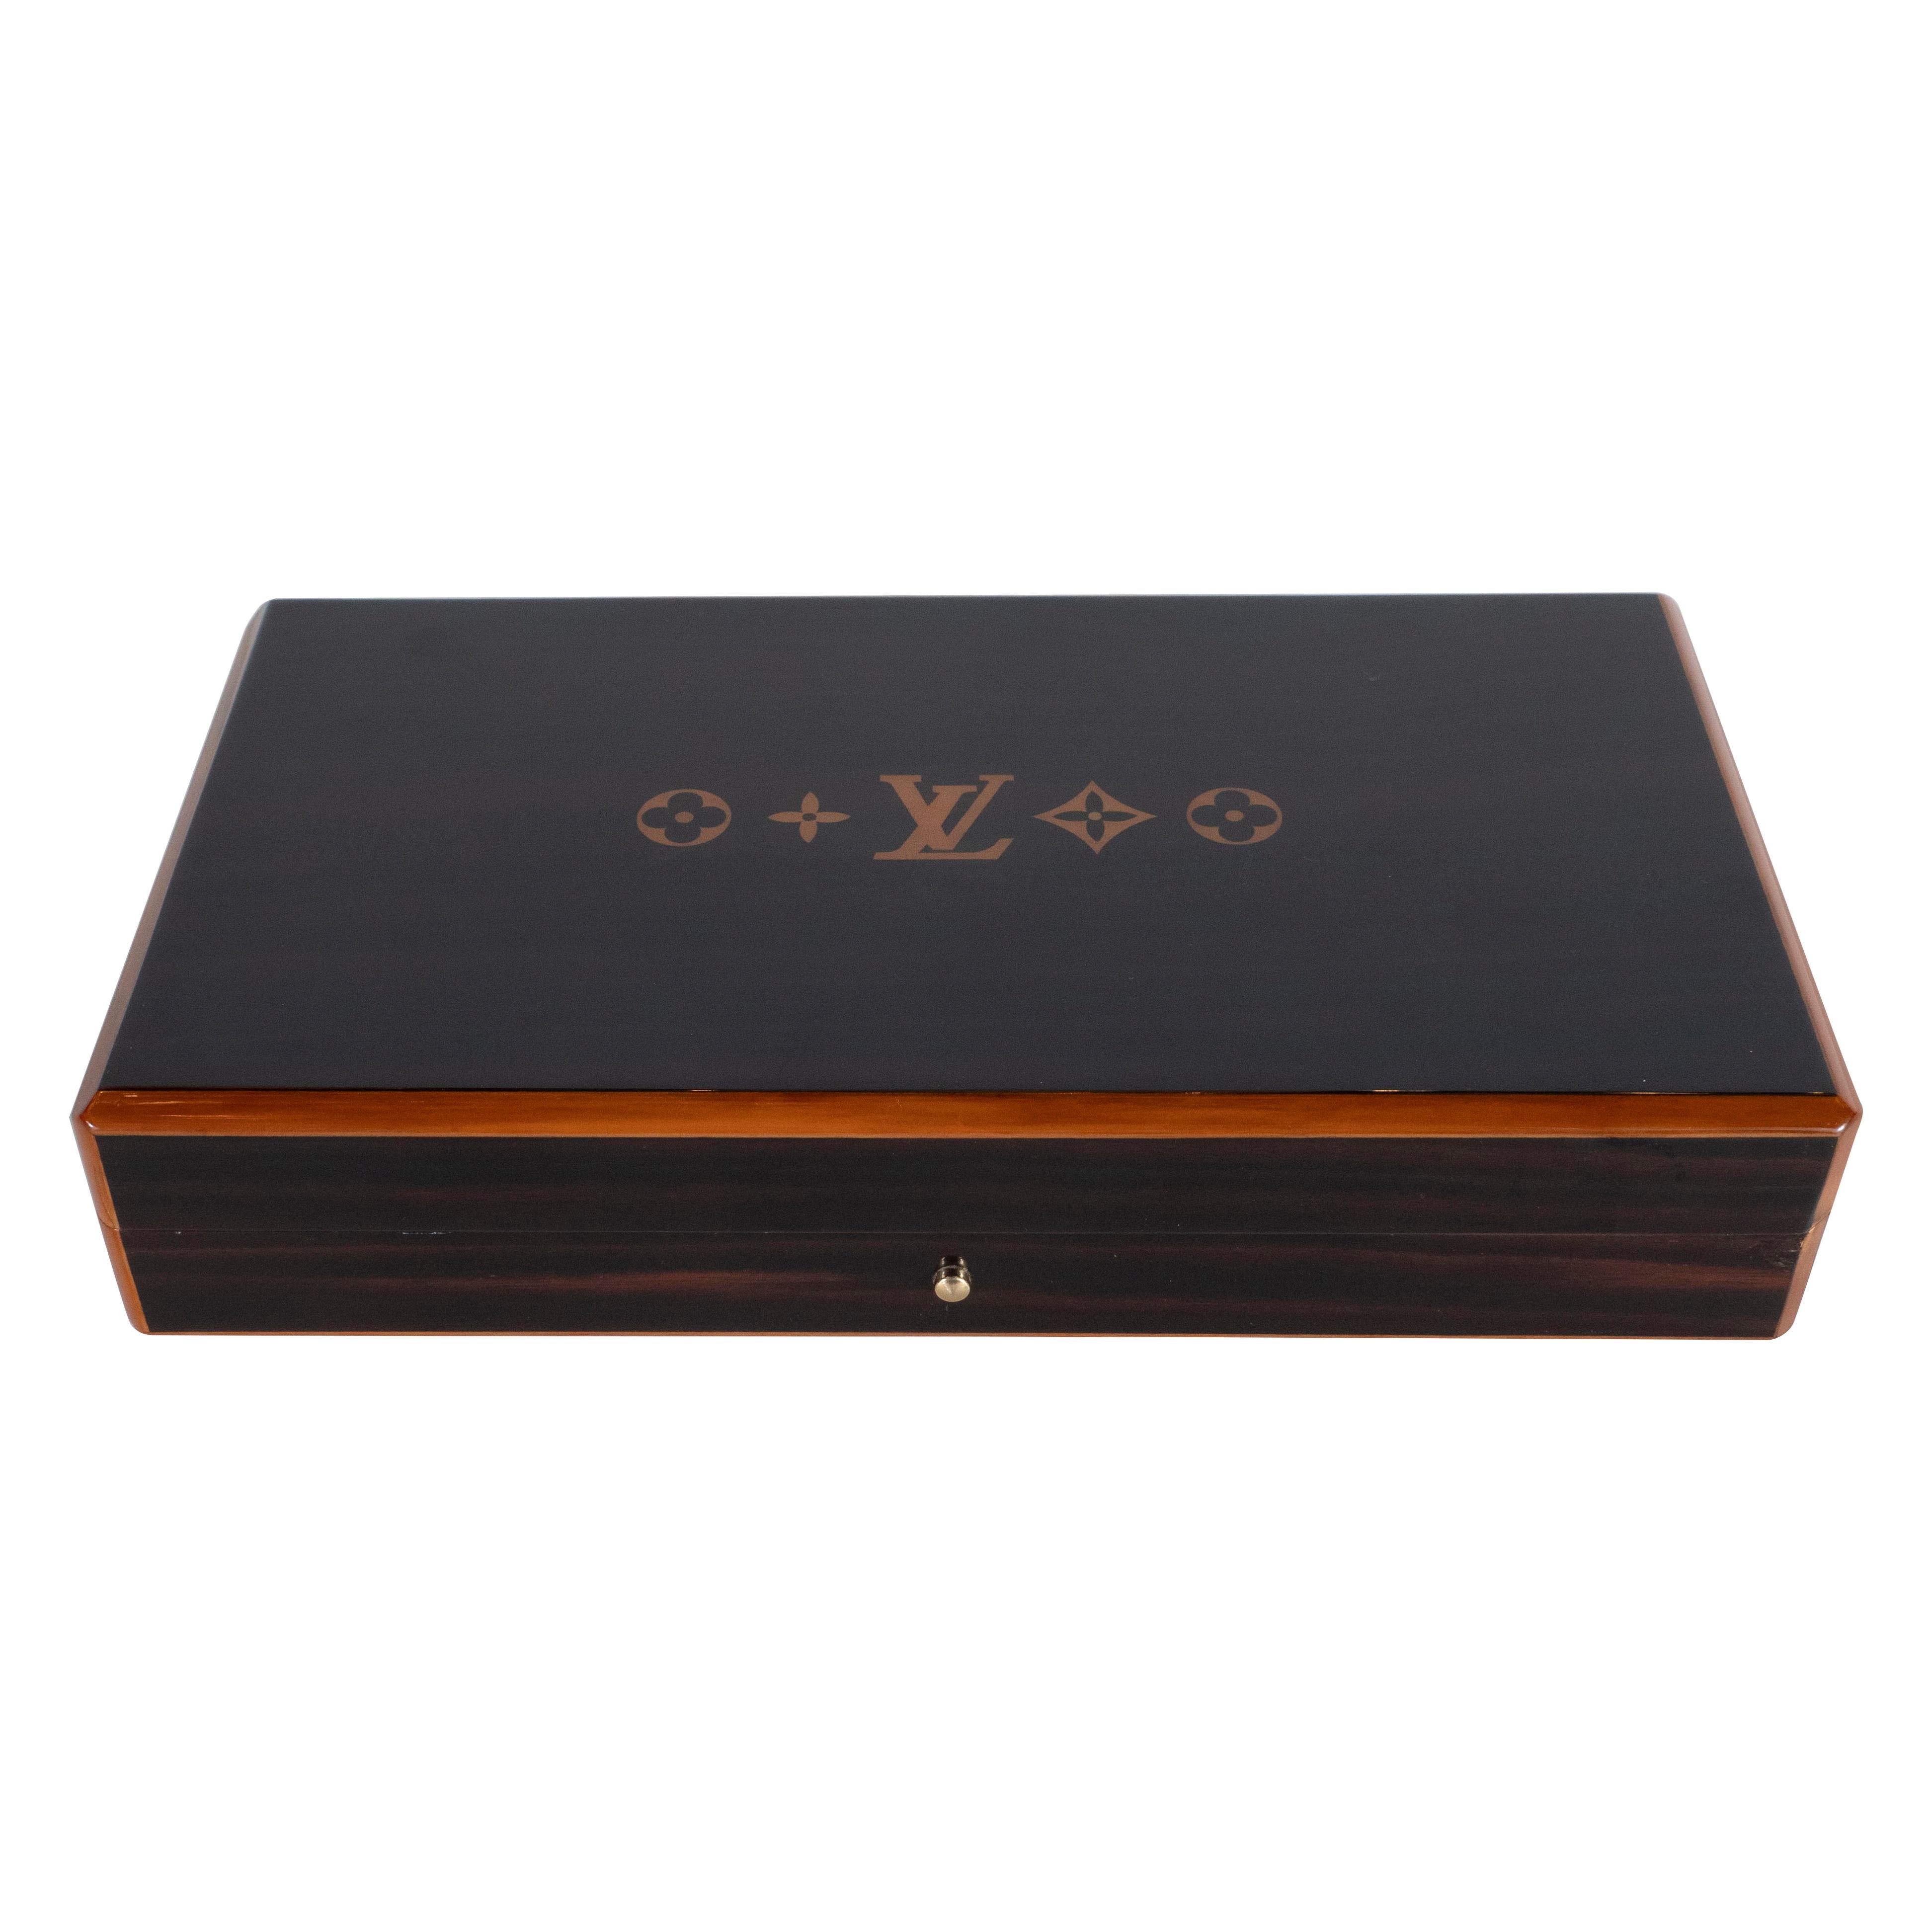 Modernist Rosewood and Cedar Monogrammed Humidor by Louis Vuitton